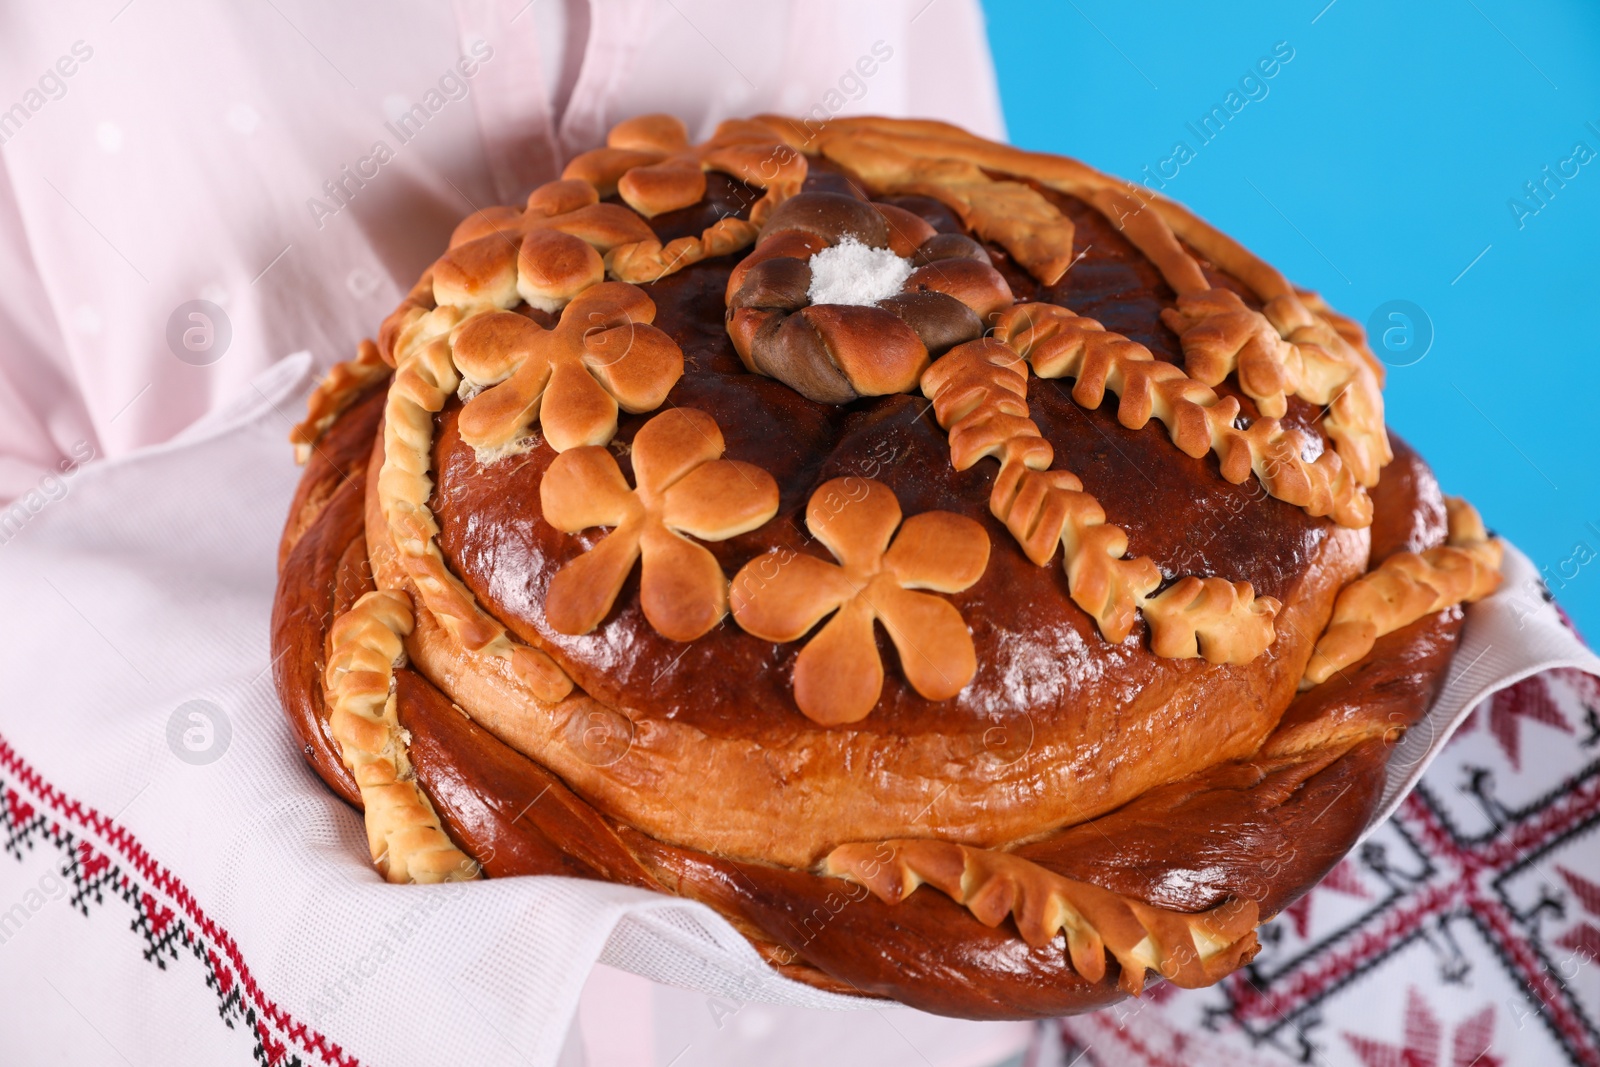 Photo of Woman with korovai on light blue background, closeup. Ukrainian bread and salt welcoming tradition